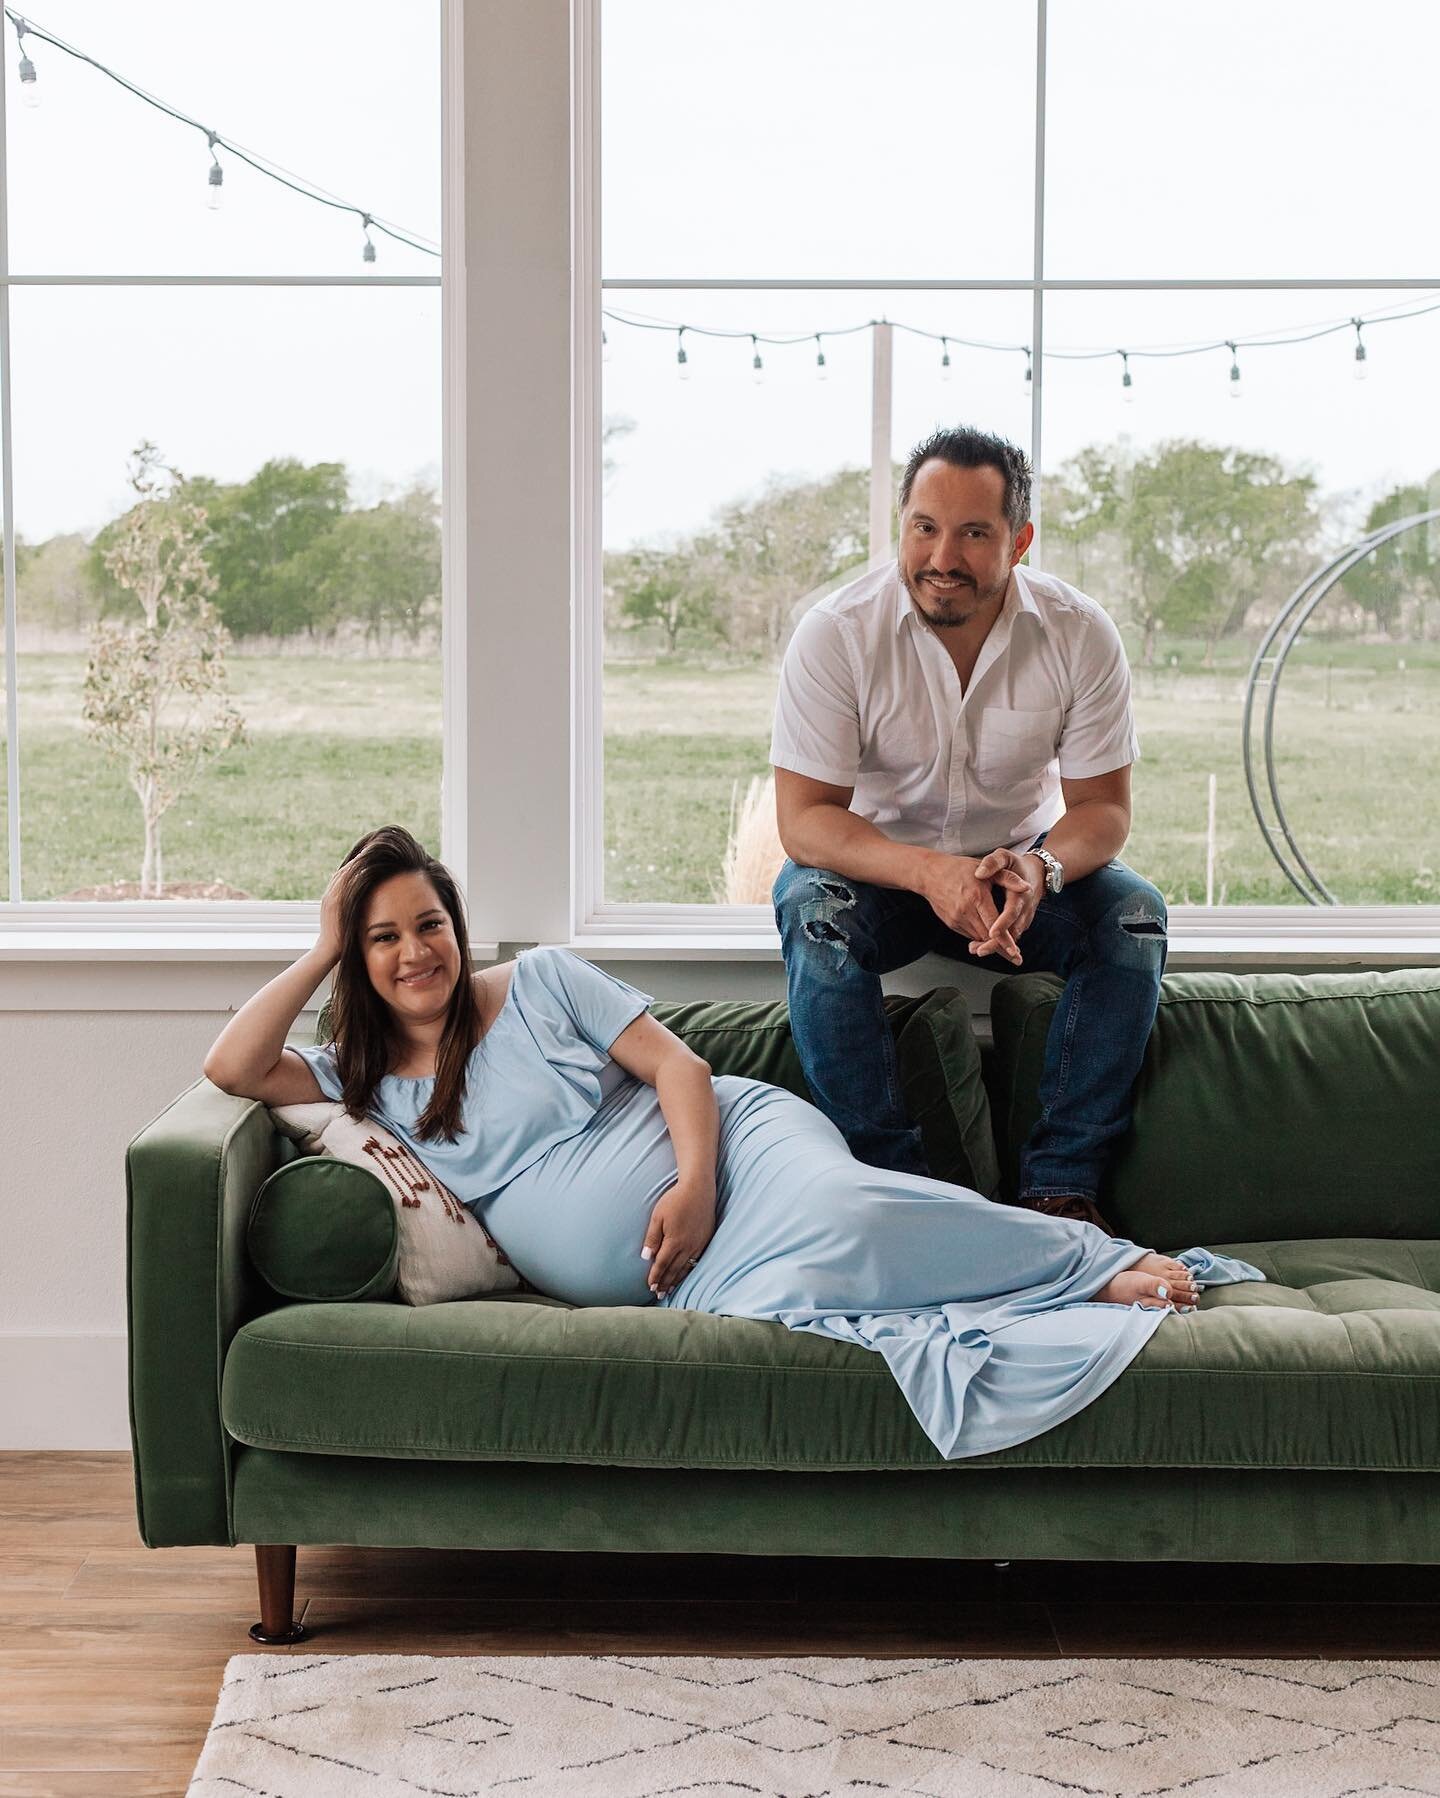 #coolparents! Patiently waiting for your arrival baby boy! So grateful to capture this miracle pregnancy for some of the best people! #lavidaveraphoto
.
.
.
.
Tags.
#instadfw #photooftheday 
#featurepalette #tangledinfilm #ftwotw #shotzdelight #coupl